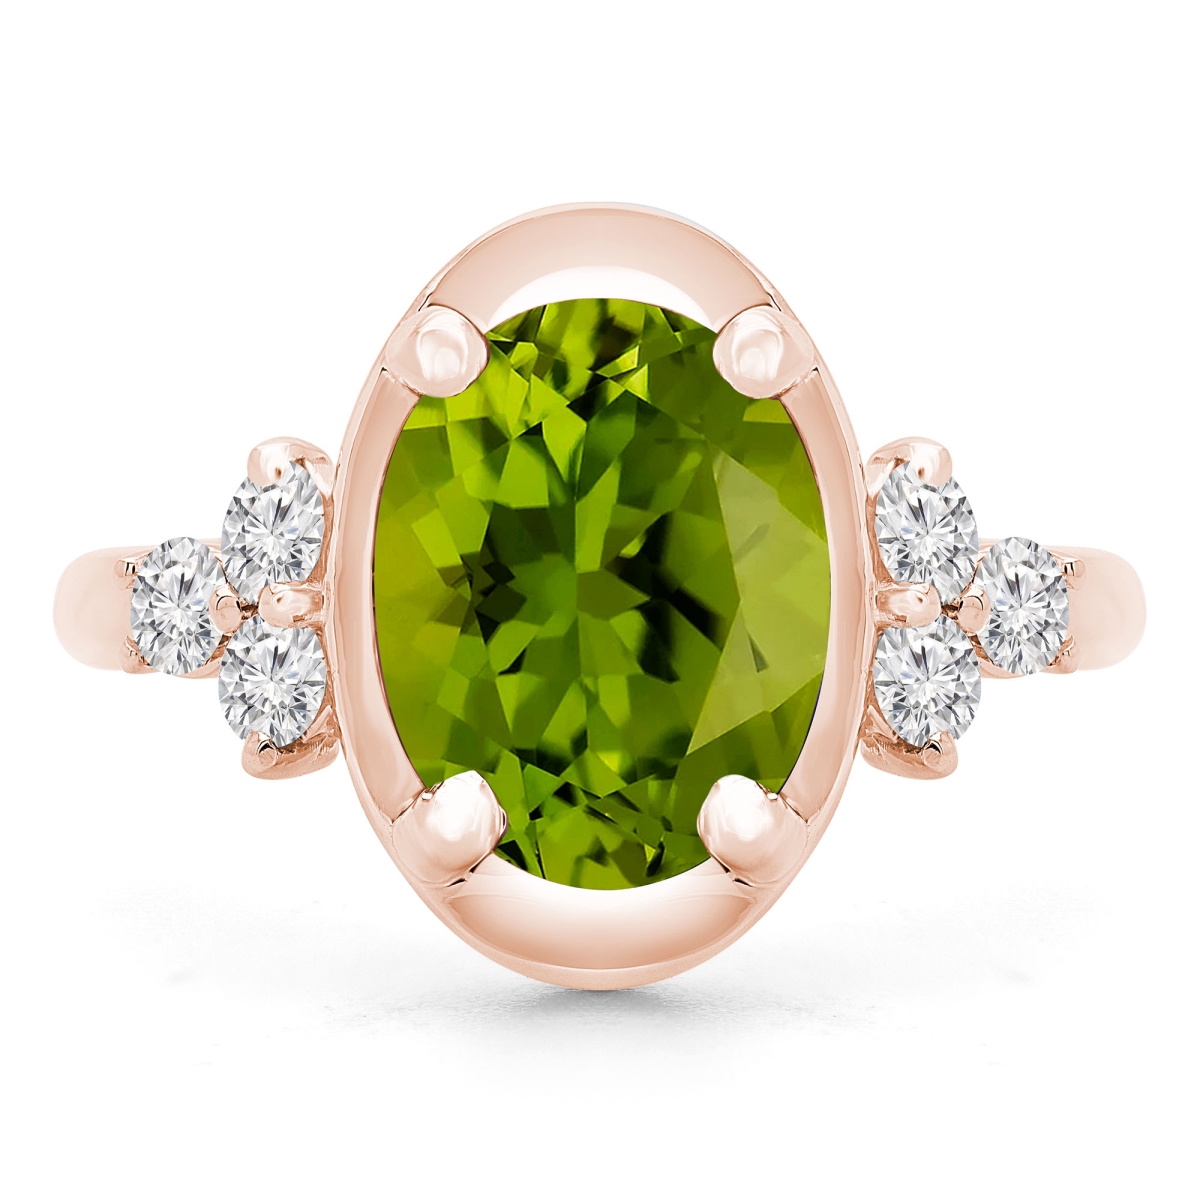 Picture of Majesty Diamonds MD190412-3.5 3.9 CTW Oval Green Peridot Cocktail Ring in 14K Rose Gold - Size 3.5